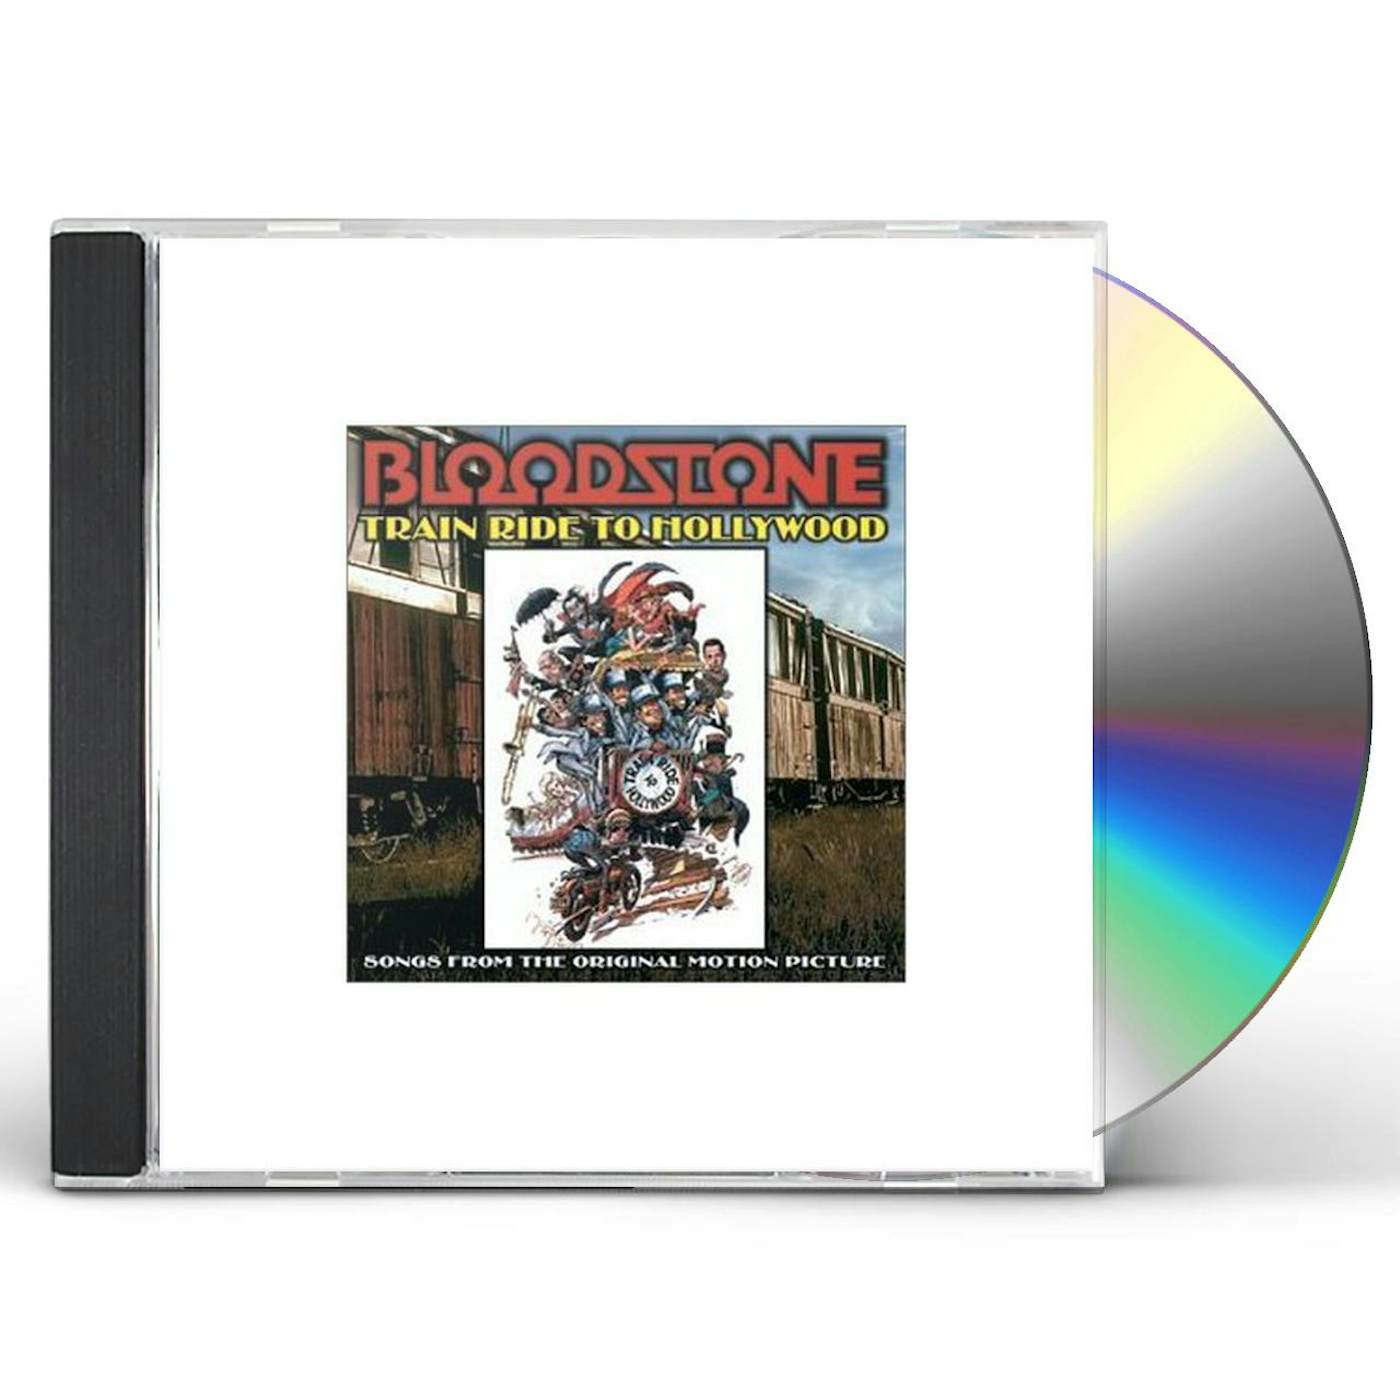 Bloodstone TRAIN RIDE TO HOLLYWOOD: Original Soundtrack CD